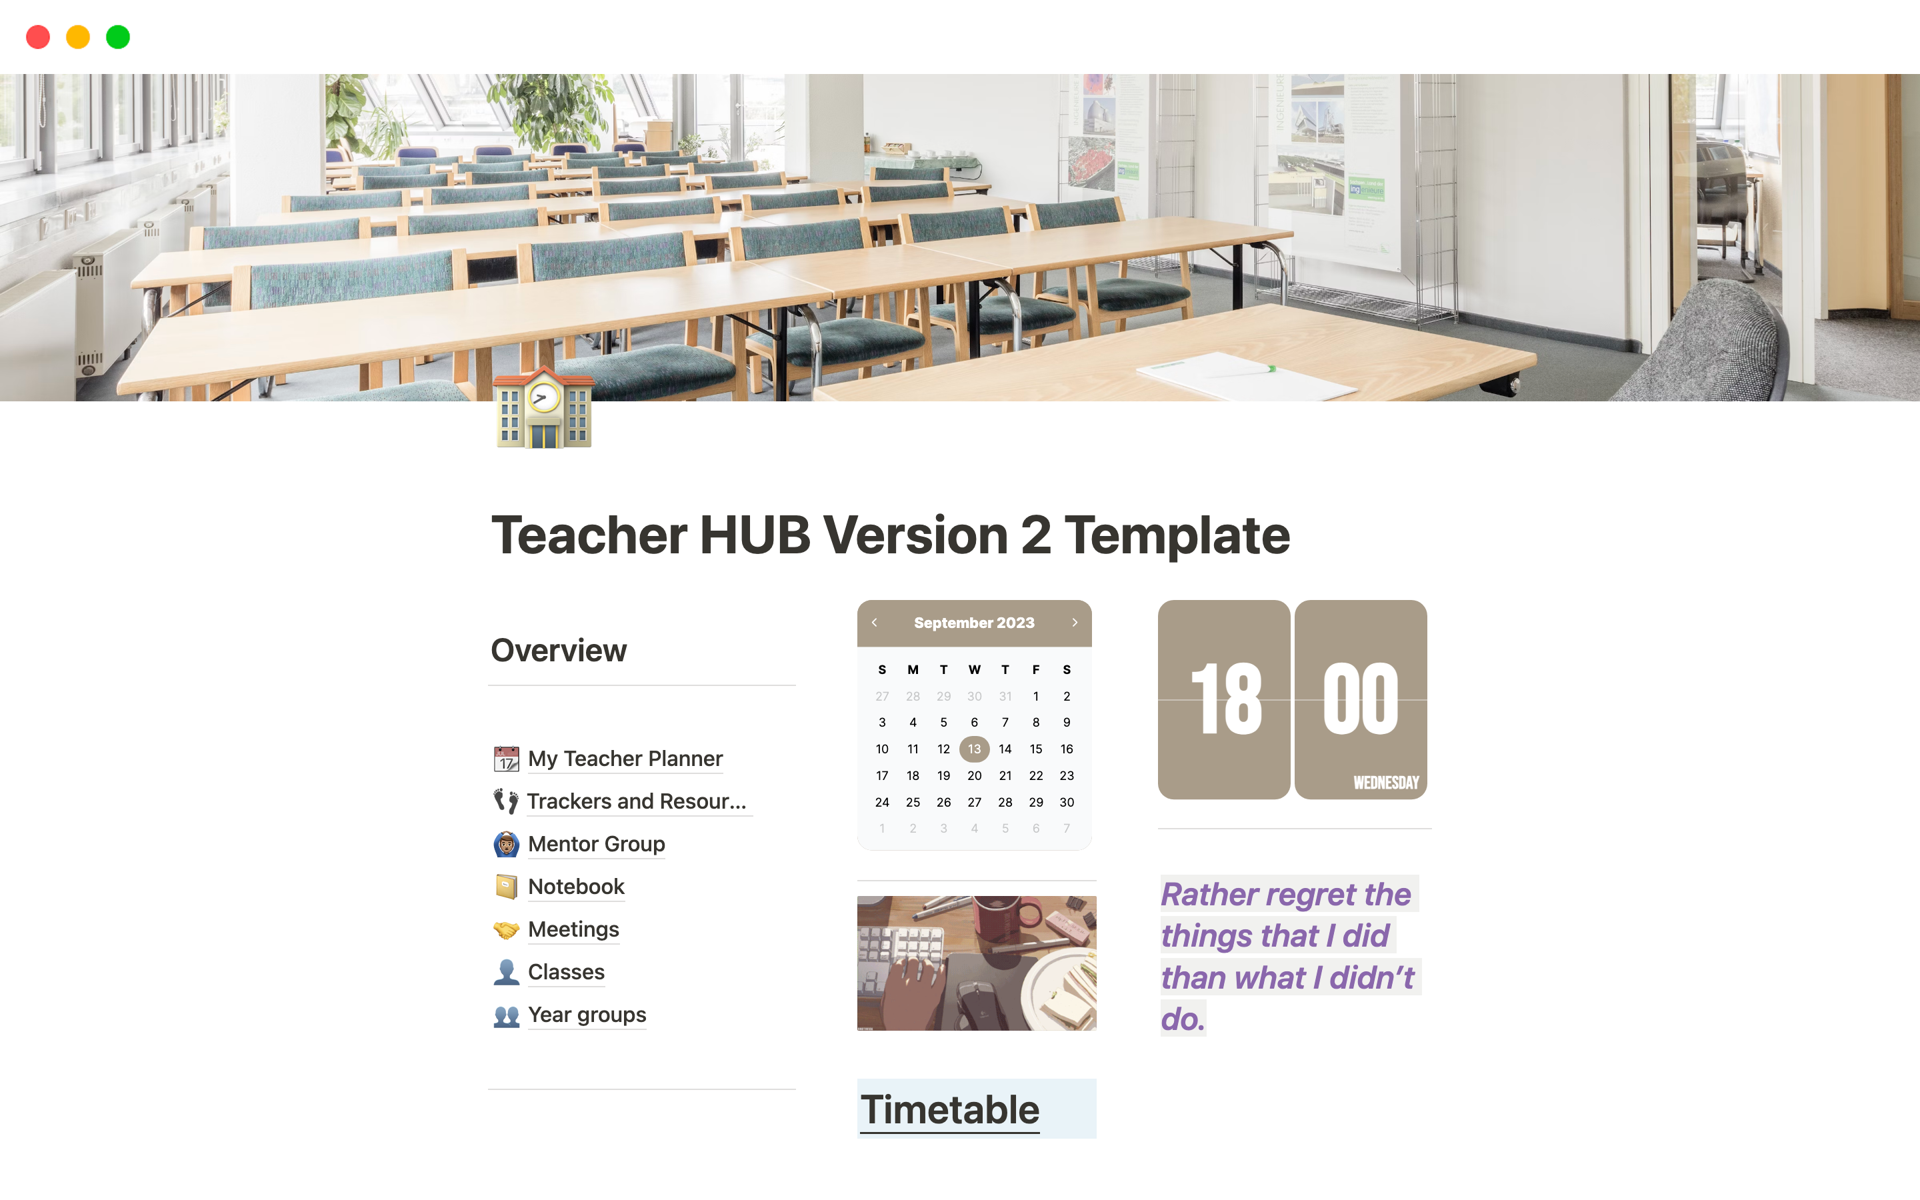 Teacher Hub - Productivity and planning centralised to improve a teachers workflow.
This template powered by Notion aims to centralise your work as a teacher into one workspace.

